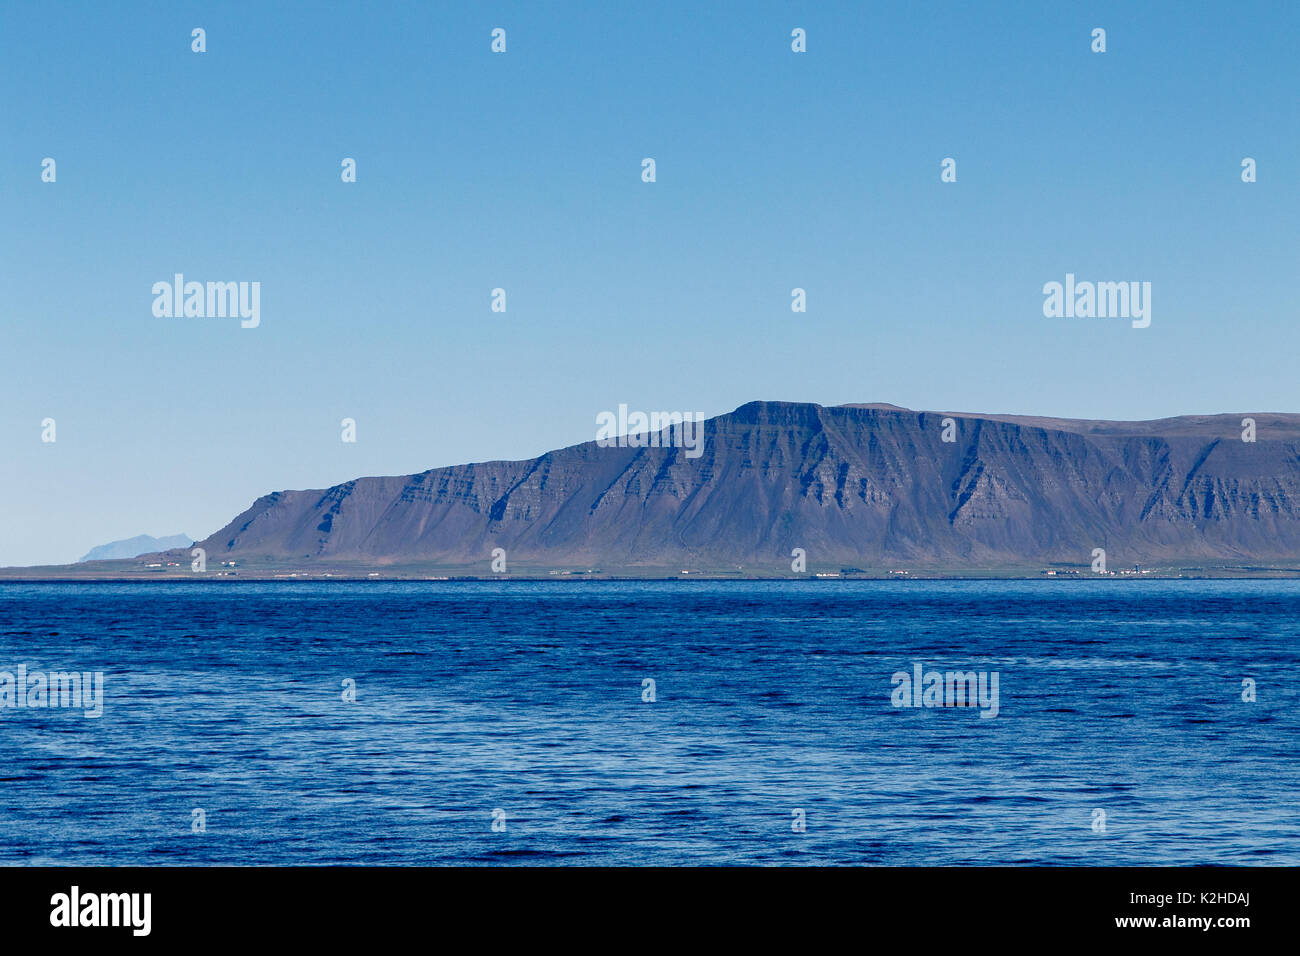 Icelandic landscape with mountains and ocean. Stock Photo